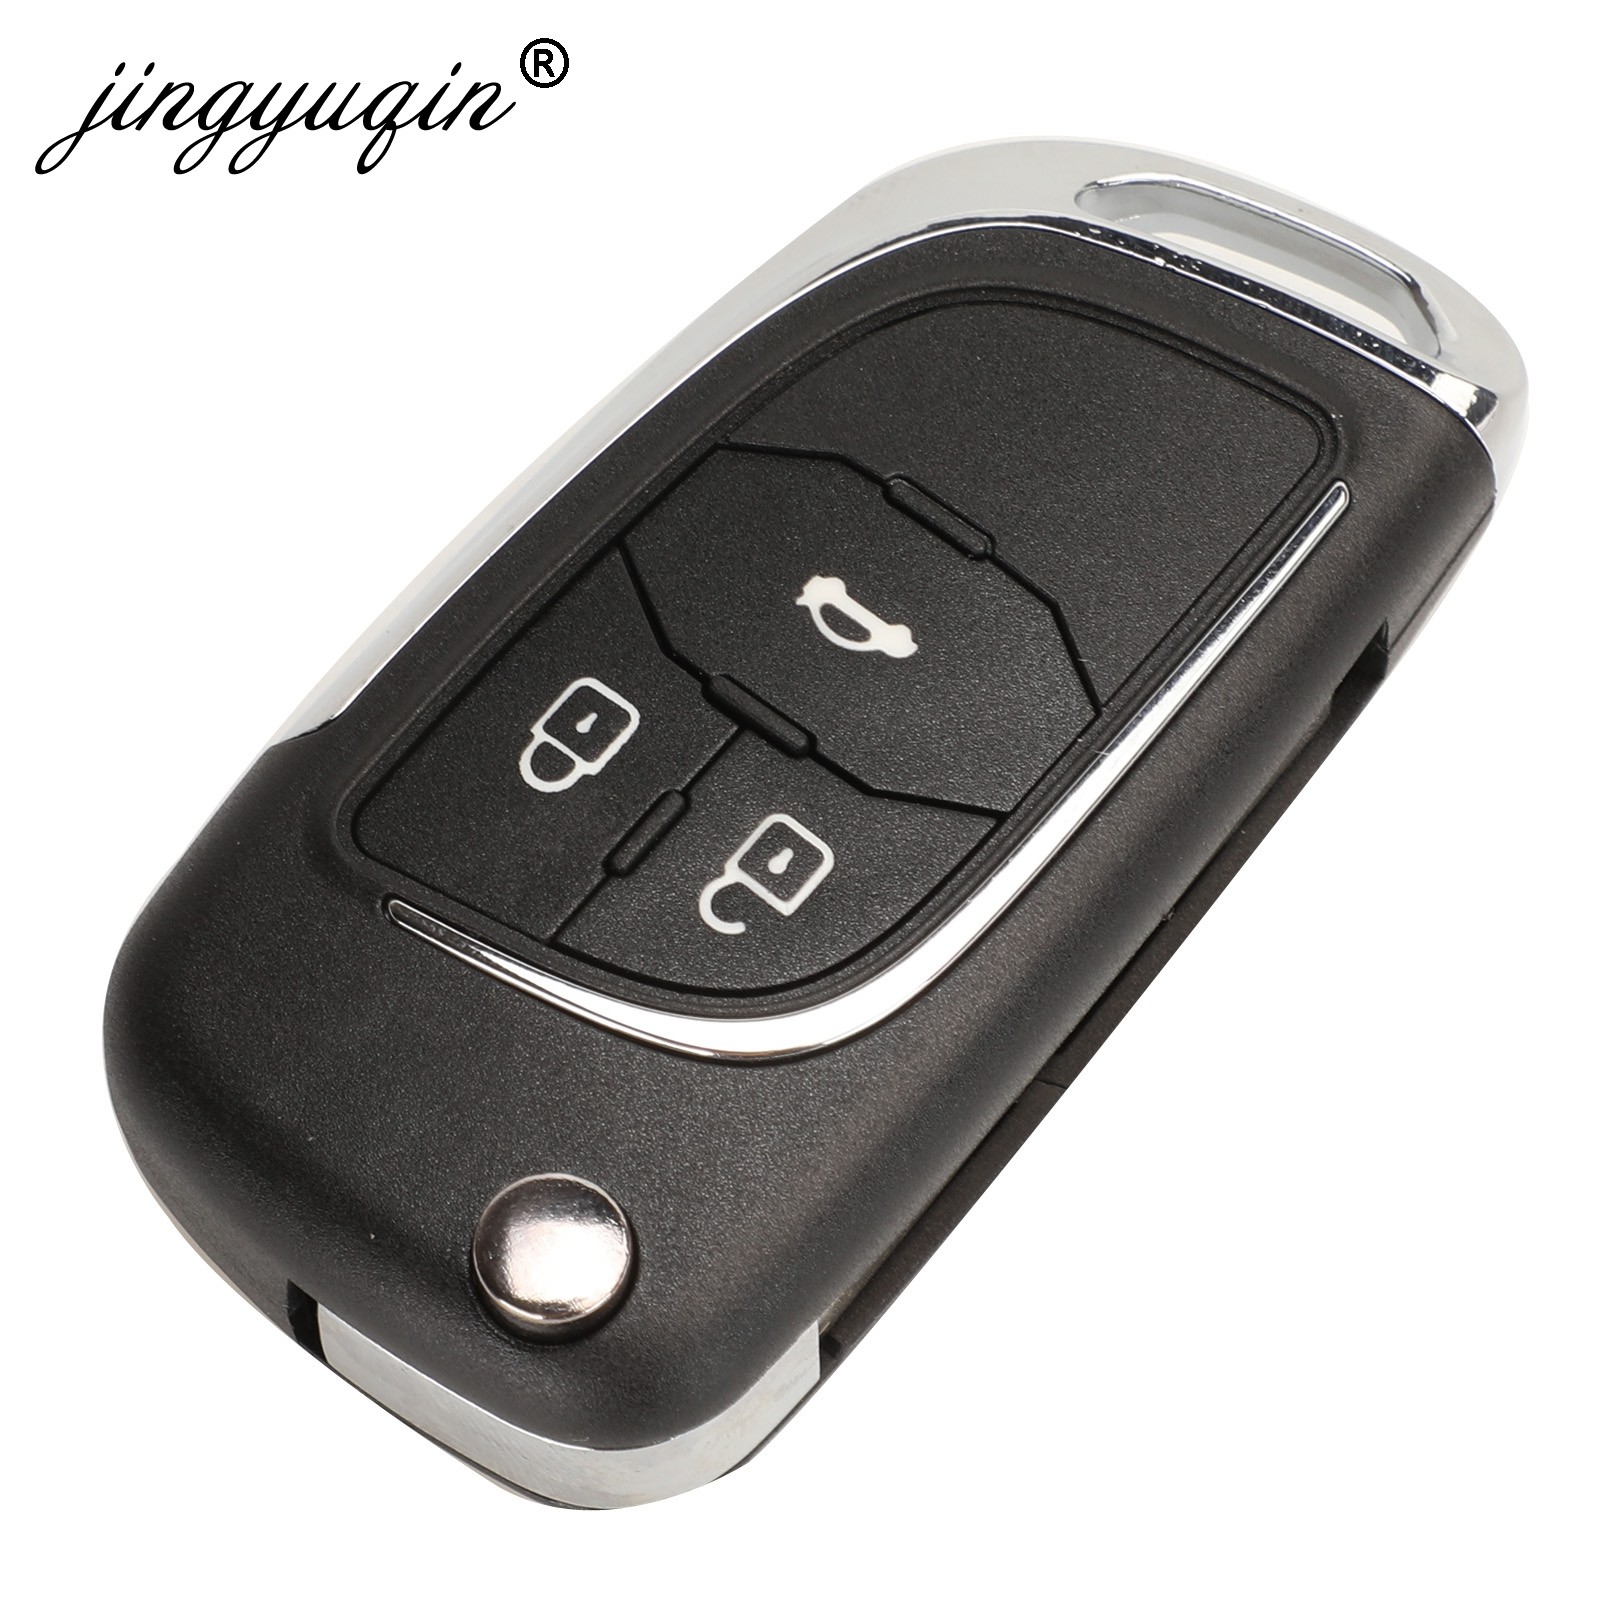 Remote Control Car Key for Chevrolet, Housing for Chevrolet Cruze, Epica, Lova, Camaro, Compatible with Buick, Opel, Vauxhall, Insignia Astra, 2/3/45B